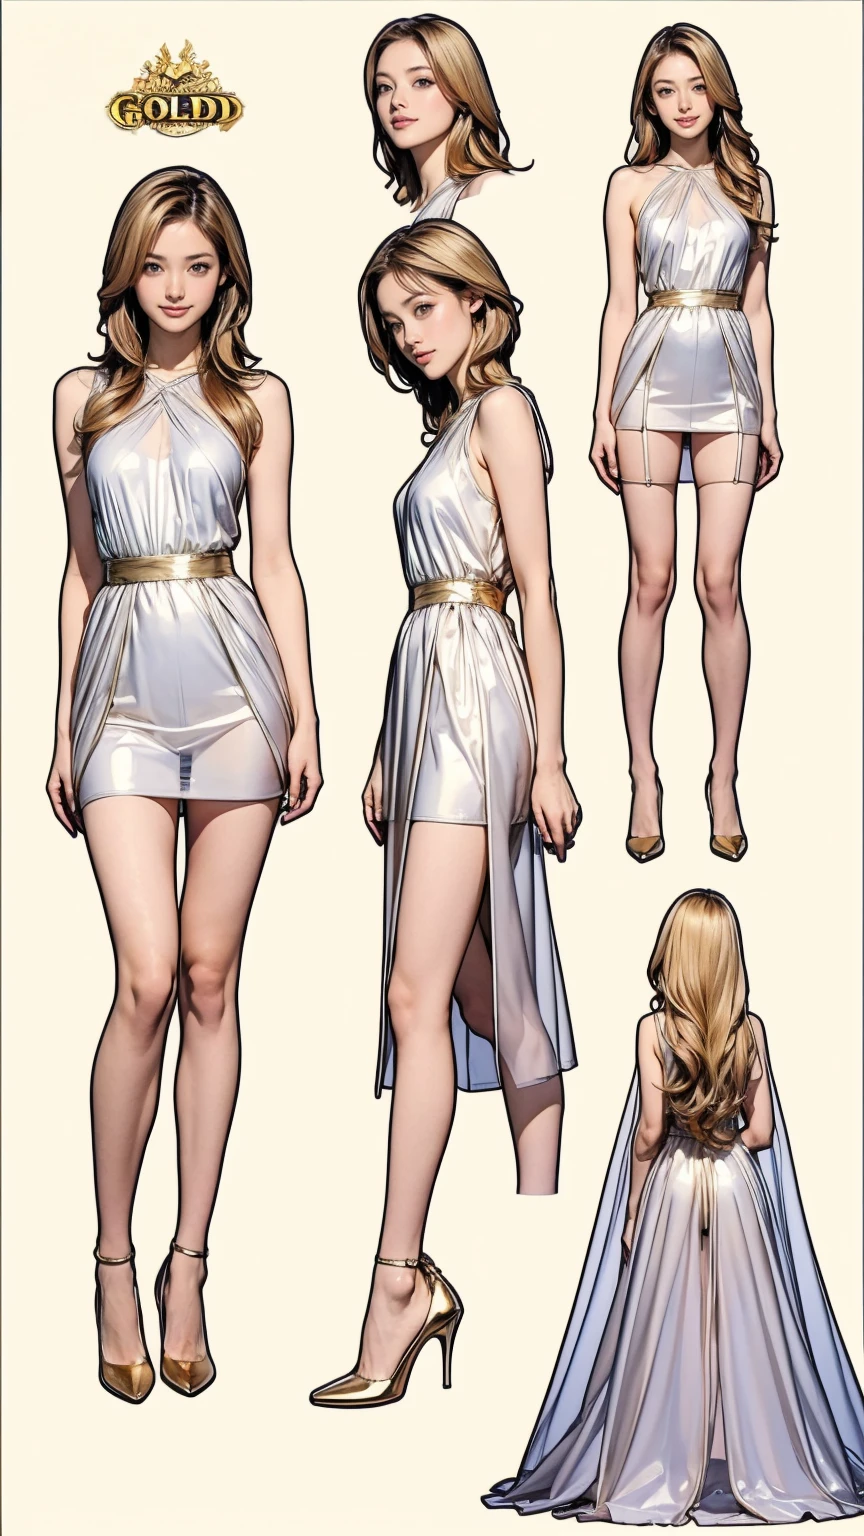 ((masterpiece)),(((Highest quality))),((Character design sheet)),Thin thighs,Long legs,((woman, alone, Long Hair)),Innocent look, Bare arms, Expose your shoulders, Gold and silver see-through dress,Golden Hair，The best smile，